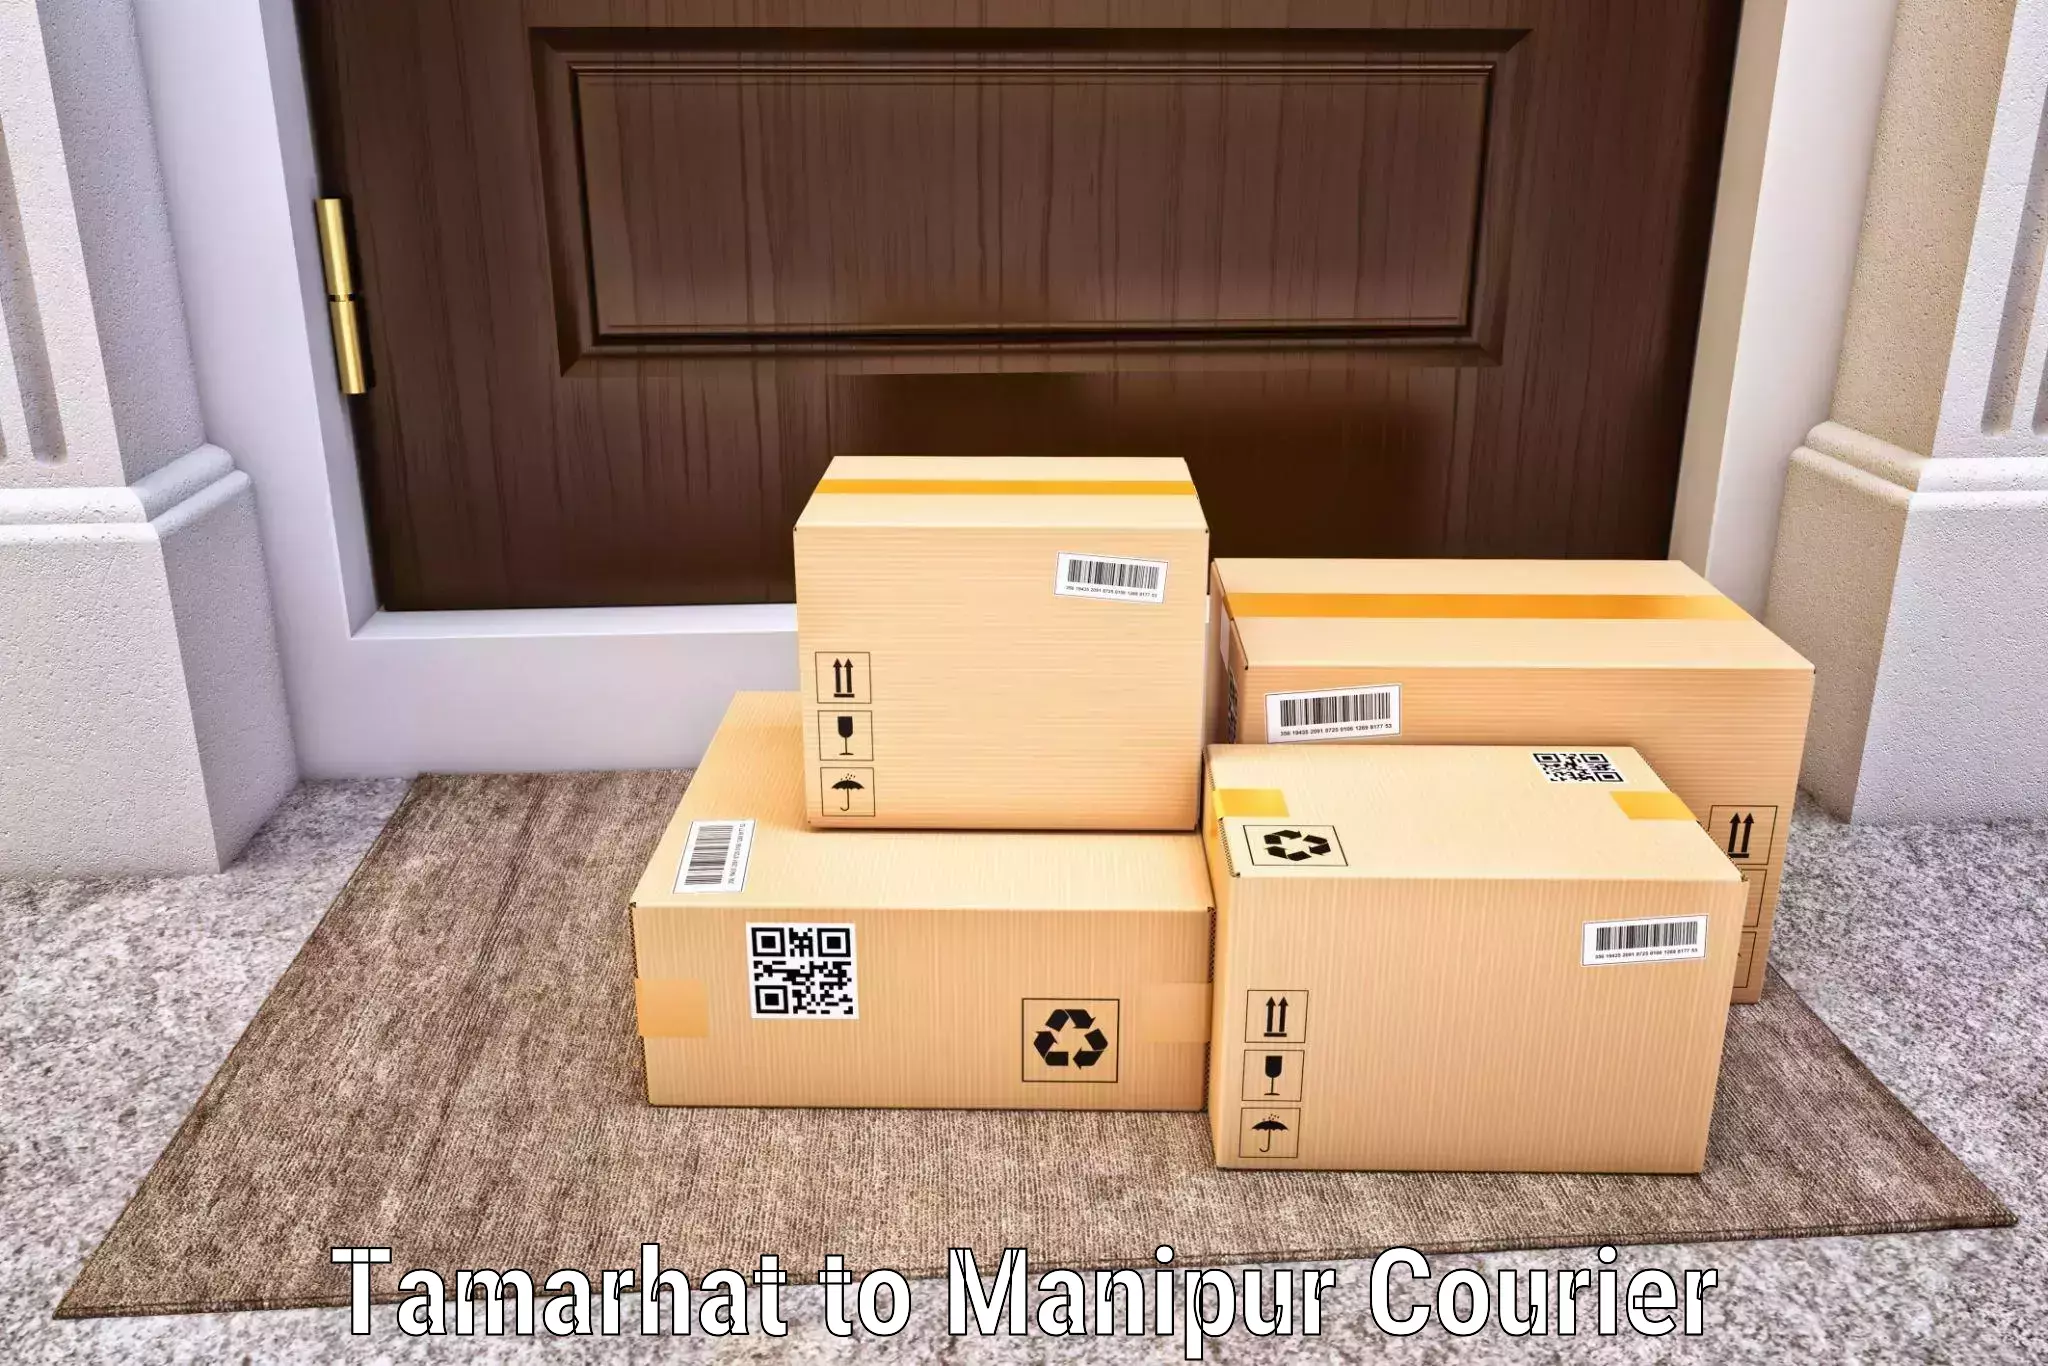 Corporate courier solutions Tamarhat to Kanti